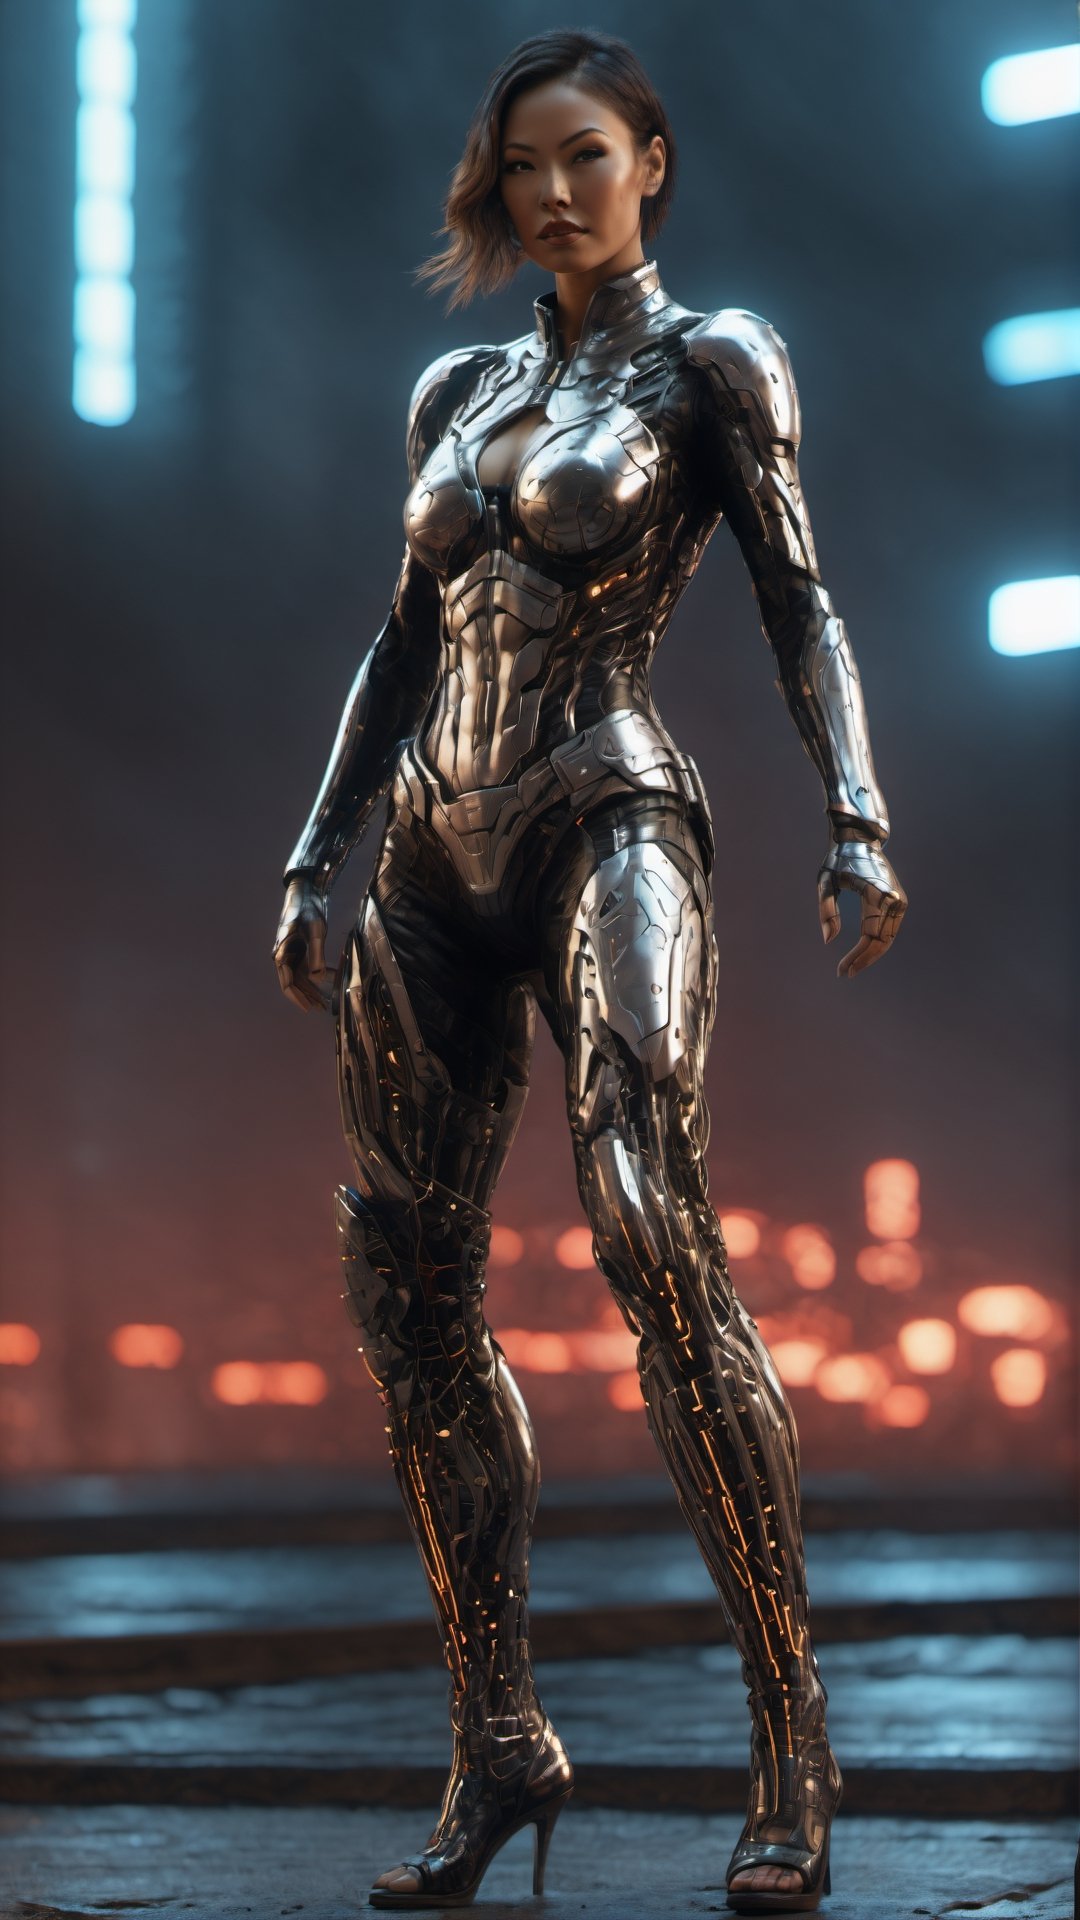 "Imagine a super-realistic depiction of a cyberpunk-style sexy lady wearing a sleek,  black and silver,  biometrically-enhanced,  glowing armor from head to toe. This cutting-edge Hi-Tech superhero suit embodies the perfect blend of advanced technology and superhero aesthetics.

Set against a stunning backdrop of a futuristic,  high-tech cityscape with neon lights and skyscrapers,  this full-body Hi-Tech glowing black and silver armor radiates power,  sophistication,  and the essence of a true technological superhero. Capture the image in a dynamic pose to showcase Sexy Lady agility and prowess in this super-realistic illustration." 